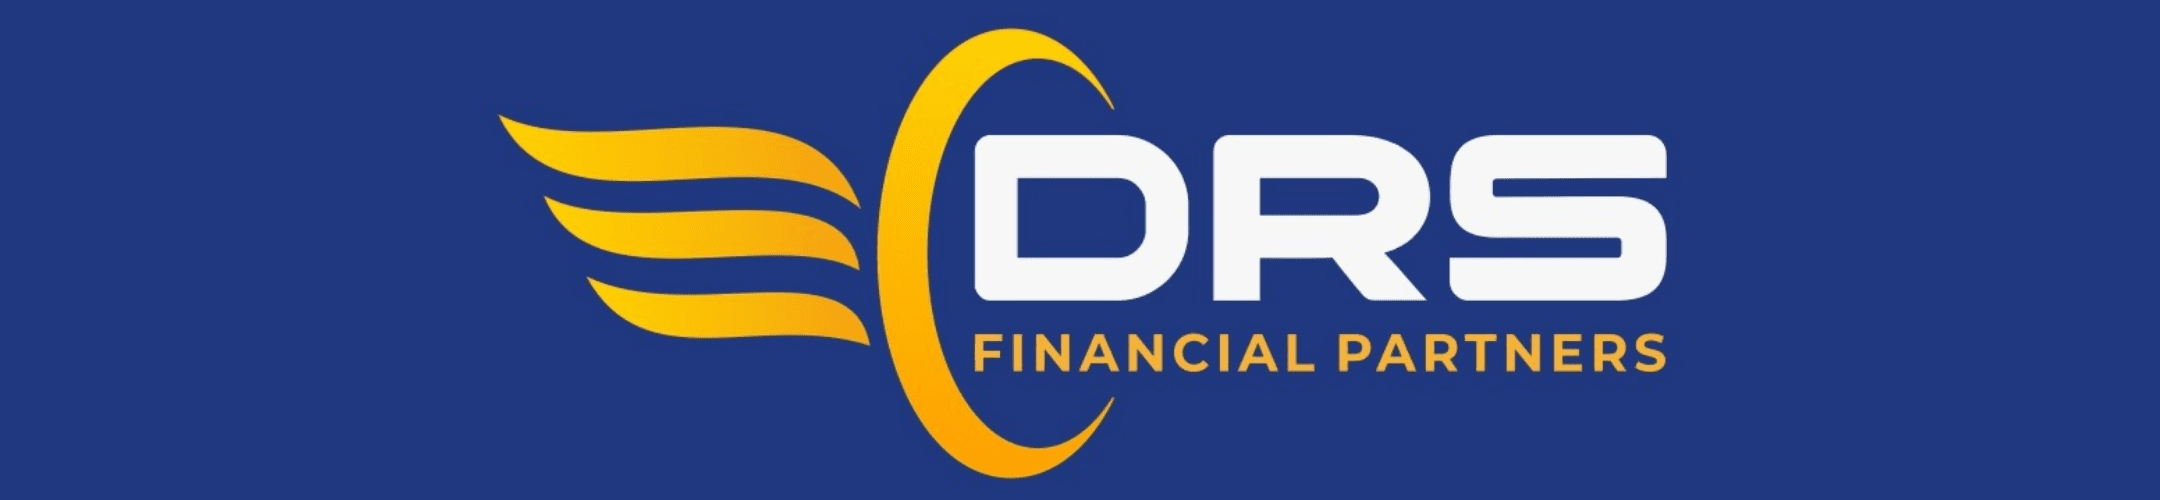 Logo of drs financial partners with a stylized yellow wing symbol to the left of the text on a blue background.